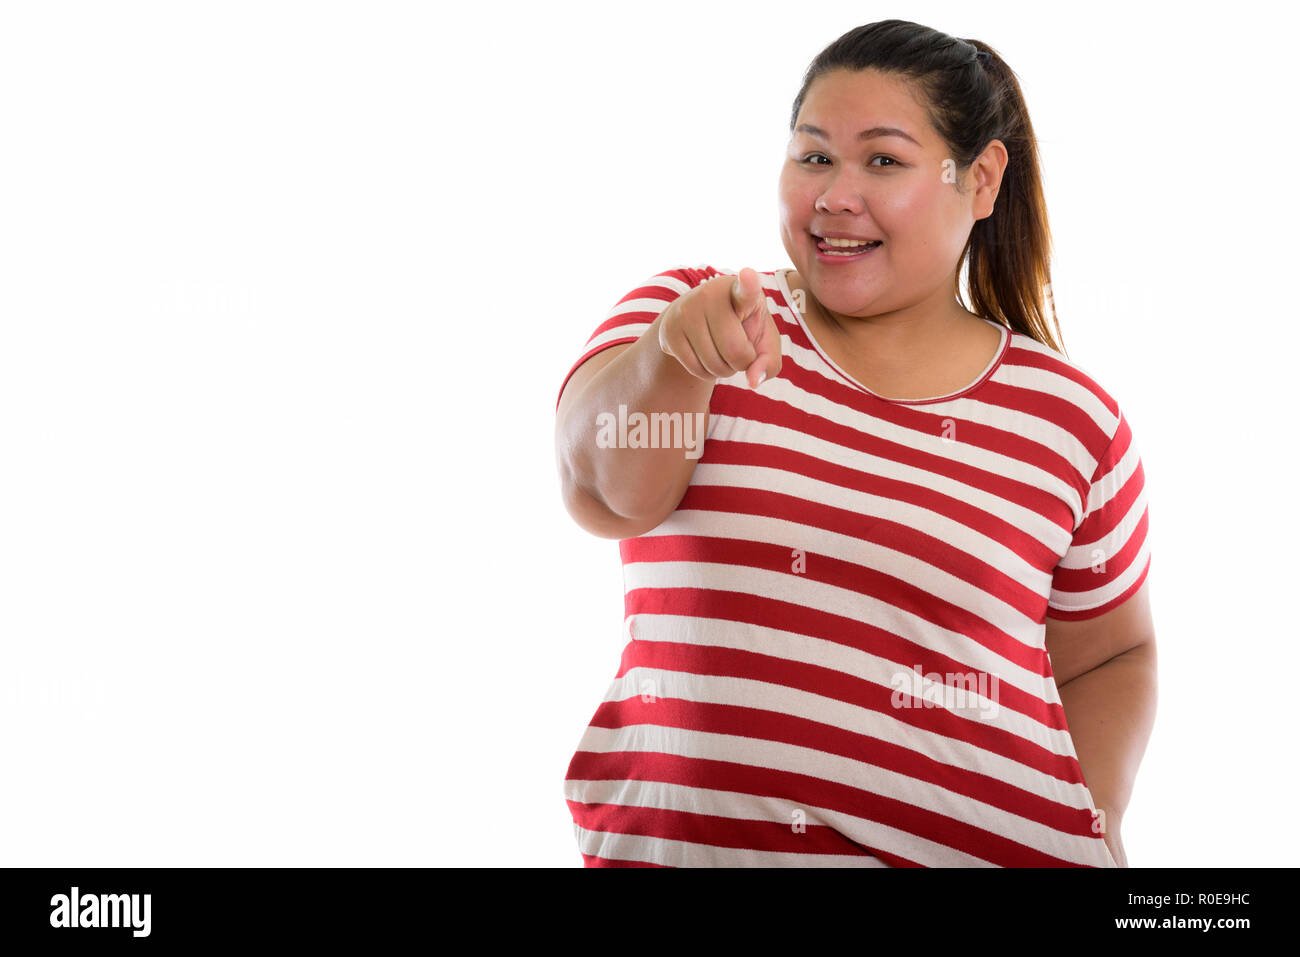 Studio shot of young happy fat woman smiling while ancragedans Banque D'Images